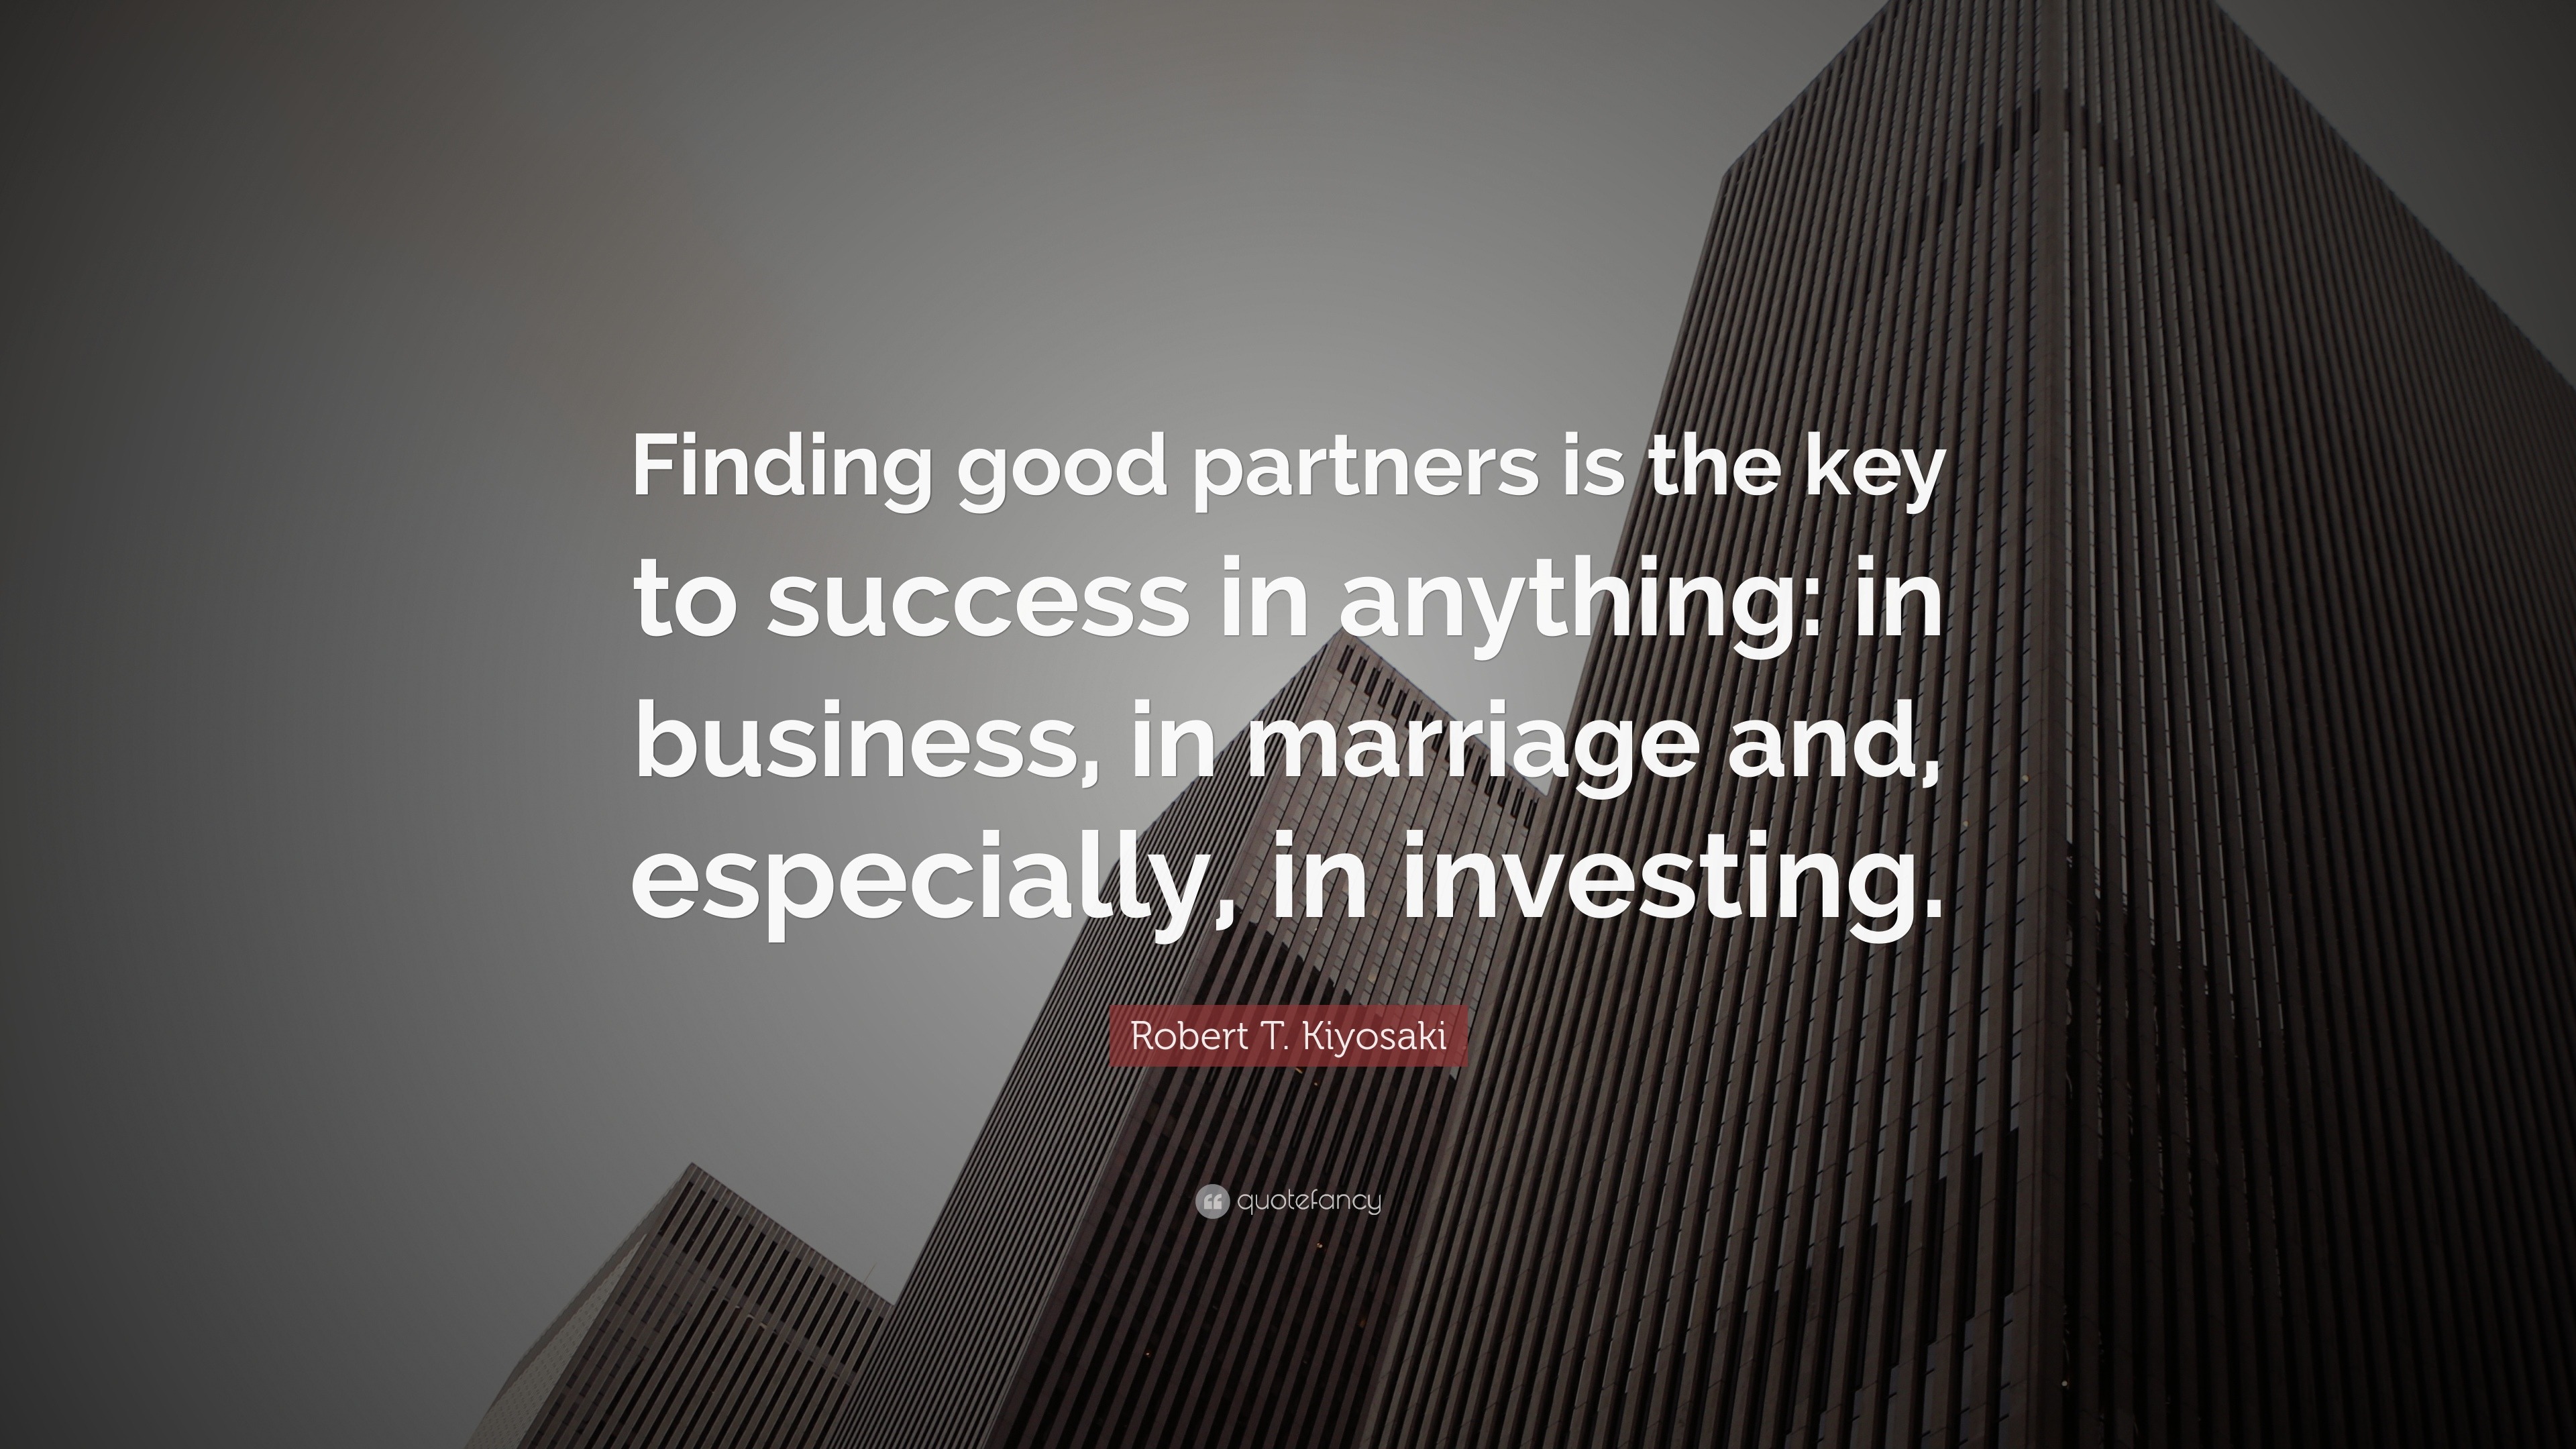 Robert T. Kiyosaki Quote: “Finding good partners is the key to success